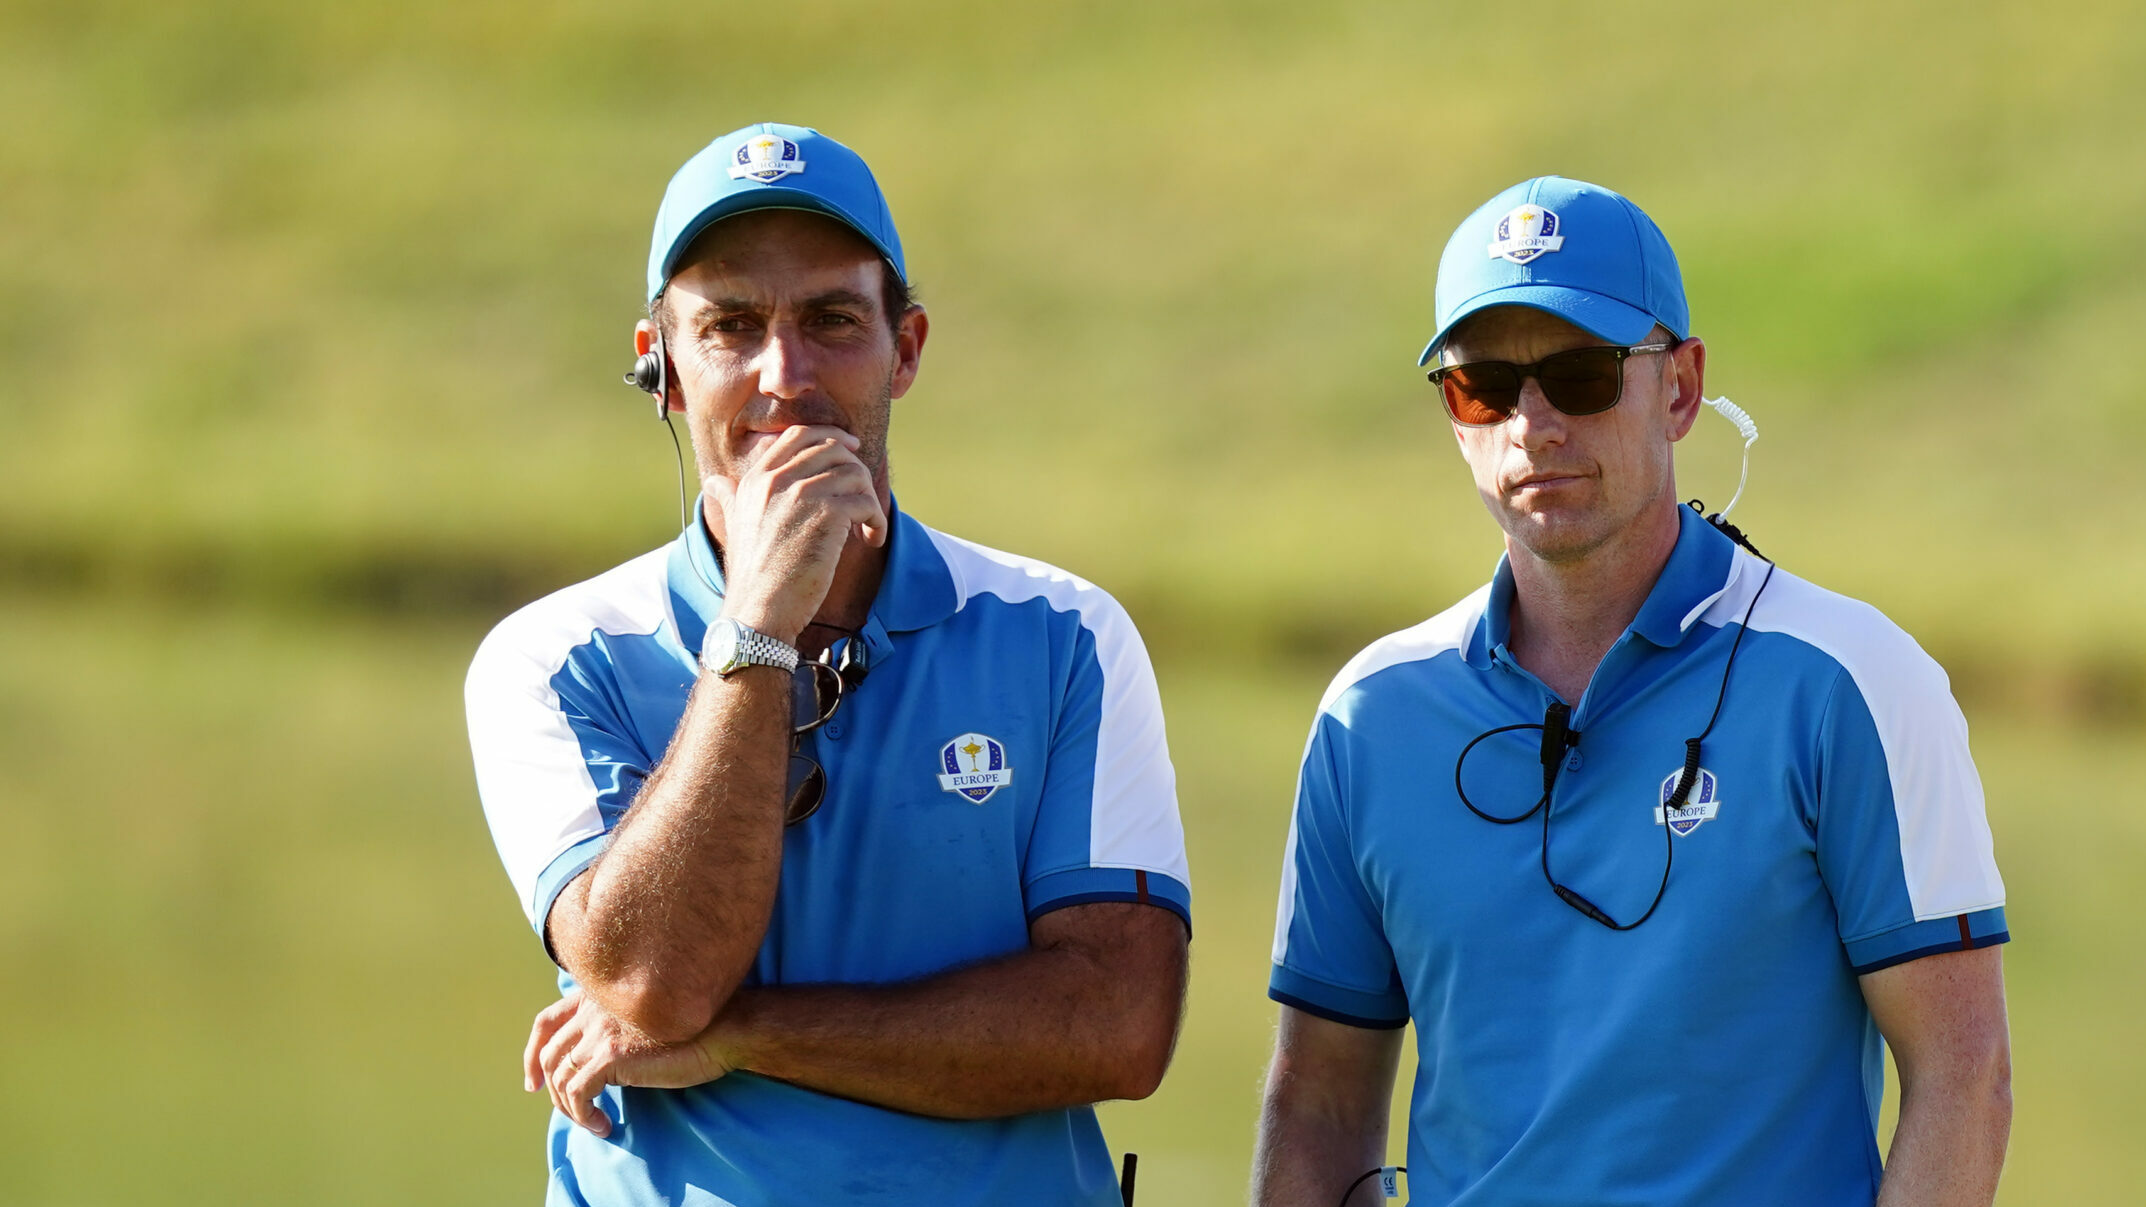 Edoardo Molinari appointed Europe’s first vice-captain for 2025 Ryder Cup